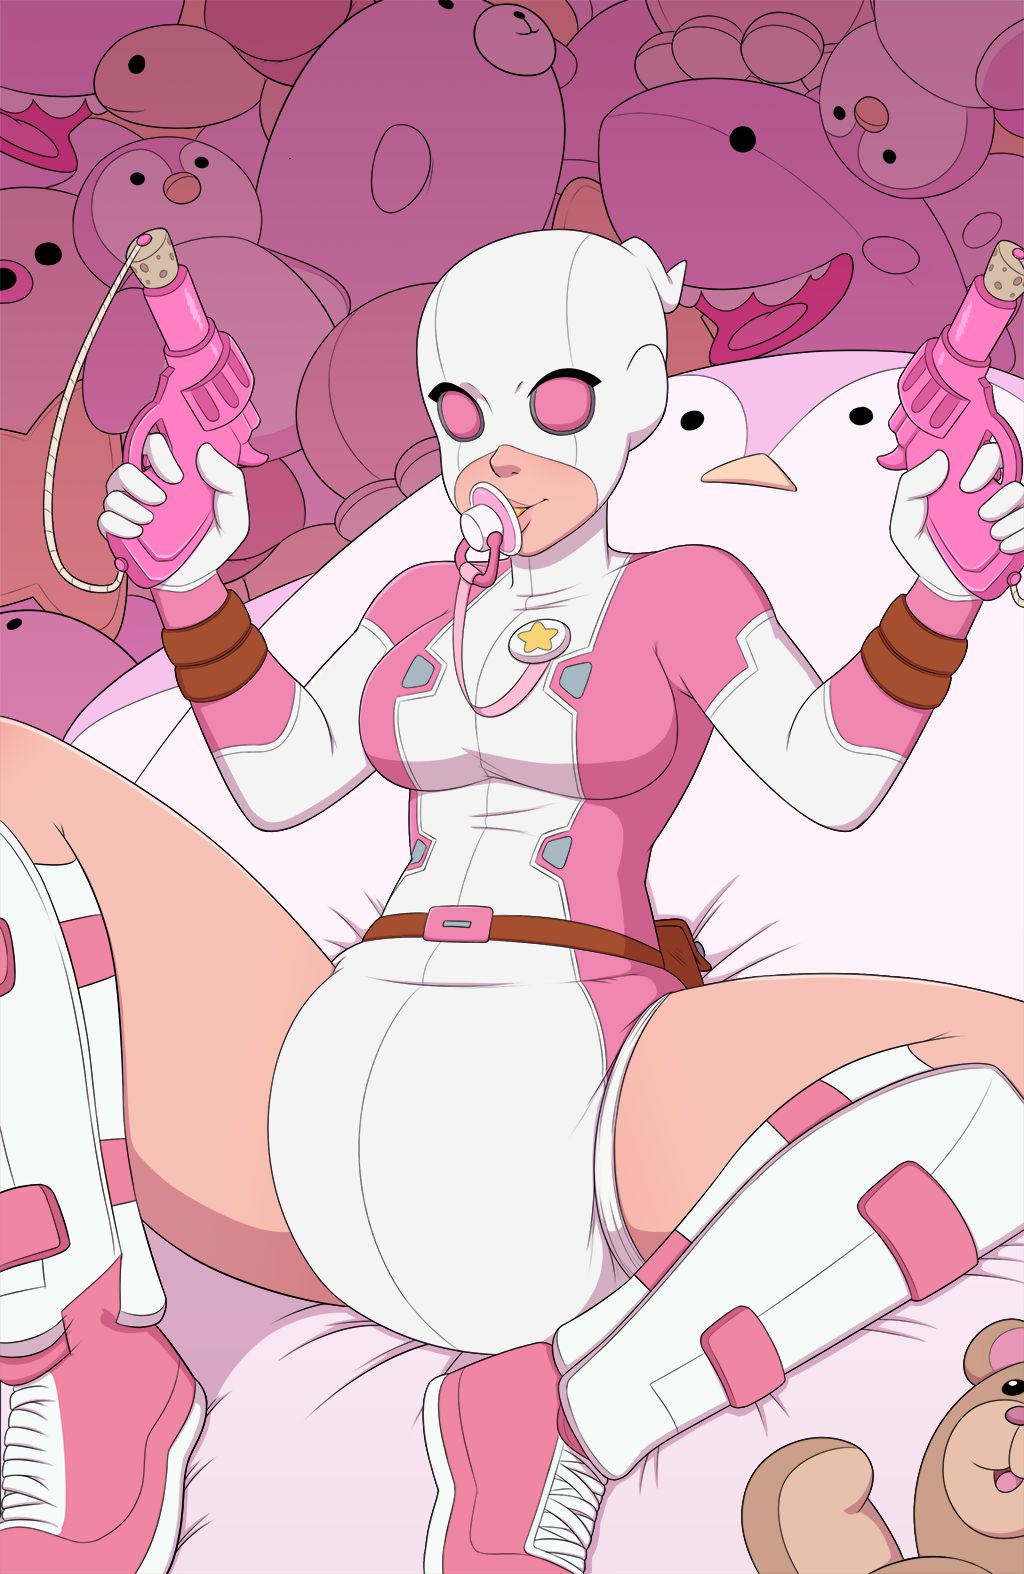 [PieceofSoap] Shits and Giggles (Gwenpool) [Ongoing] 2